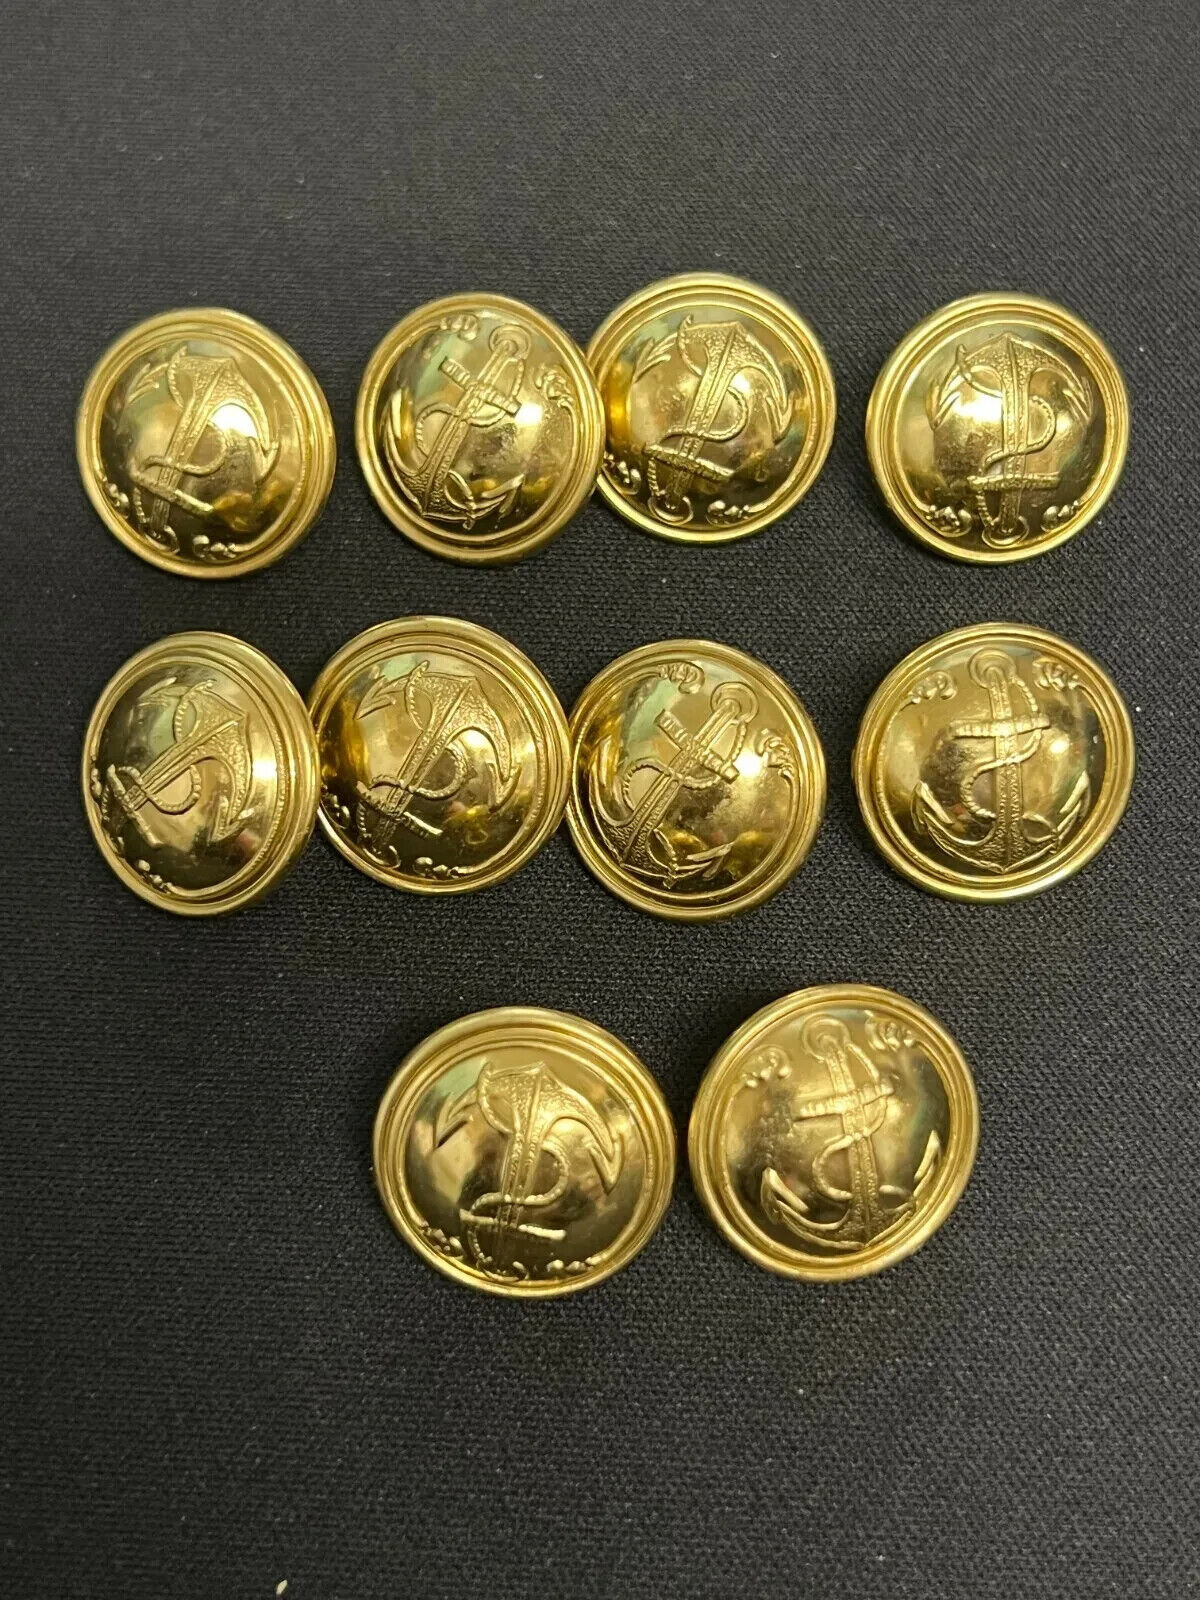 Vintage 10 French NAVY Army Military uniform buttons PARIS